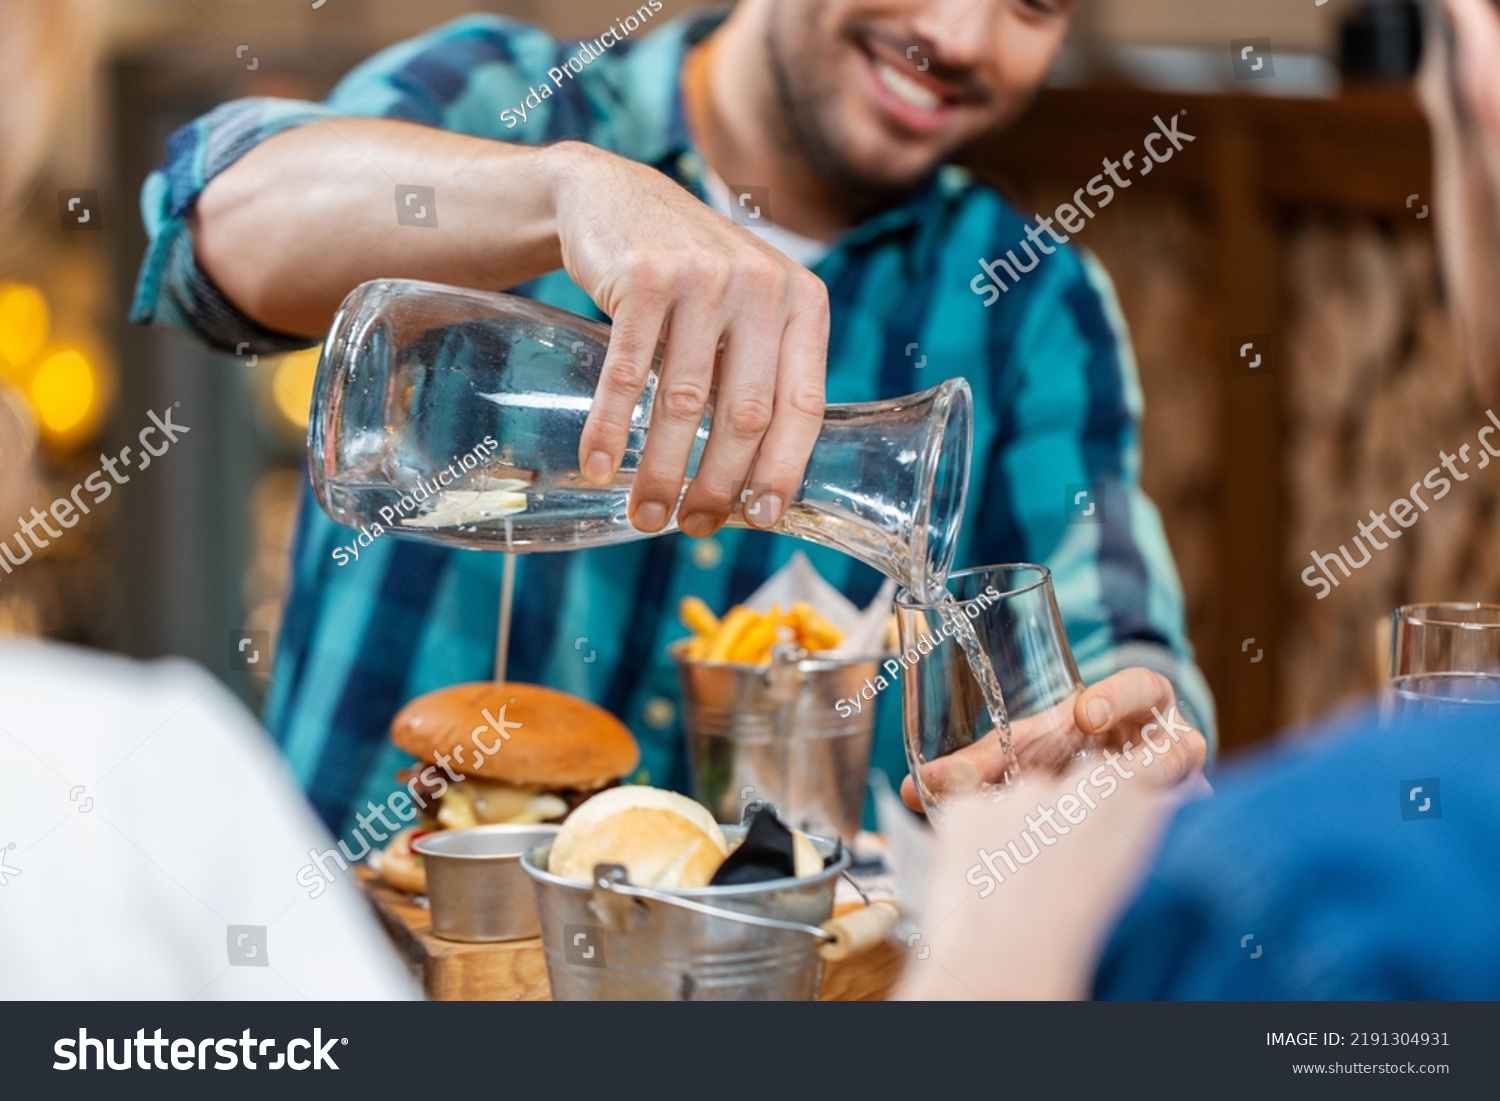 food, leisure and people concept - happy smiling man having dinner at restaurant and pouring water from jug to glass #2191304931